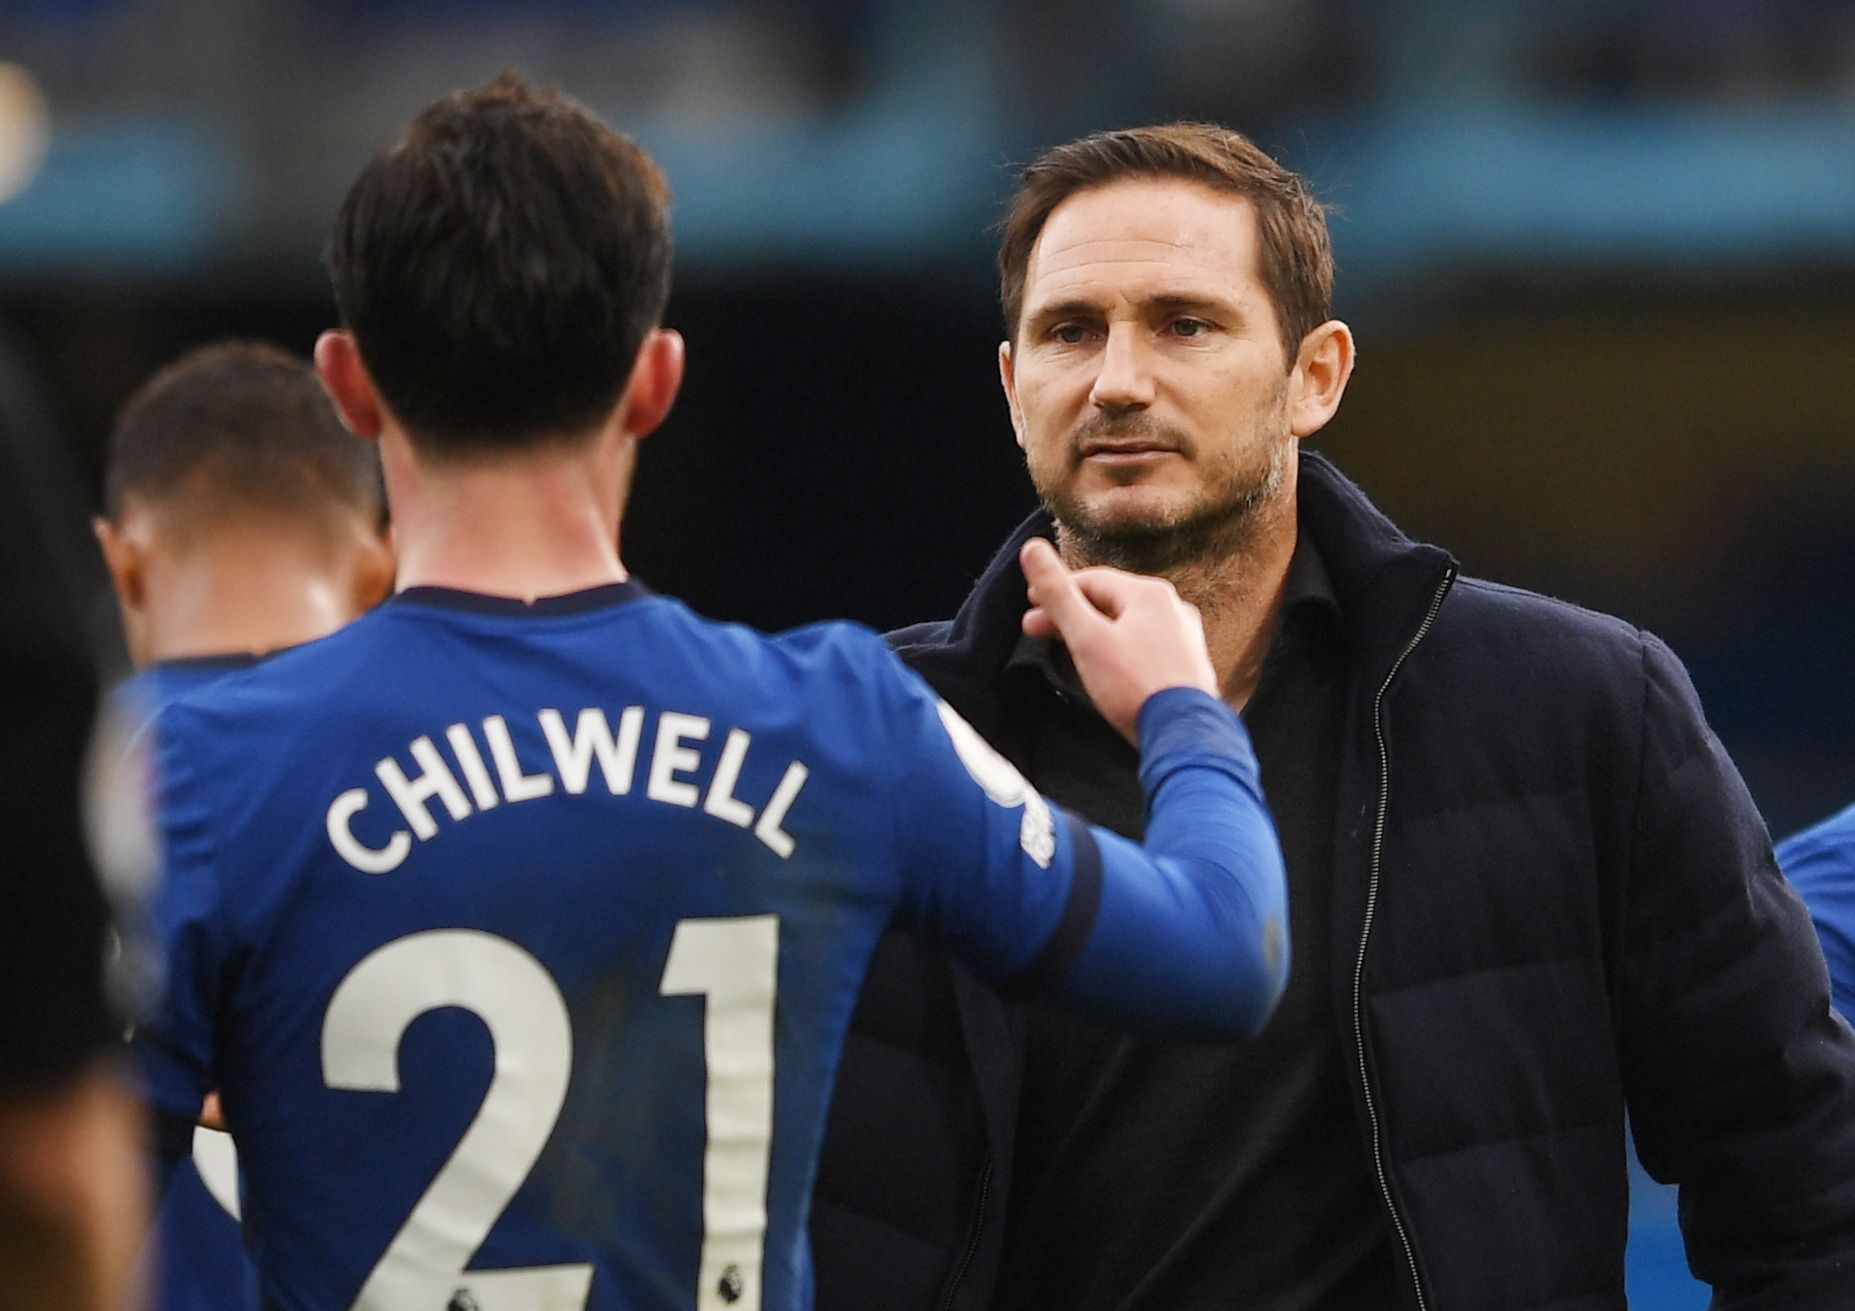 Soccer Football - Premier League - Chelsea v Crystal Palace - Stamford Bridge, London, Britain - October 3, 2020 Chelsea manager Frank Lampard celebrates with Ben Chilwell after the match Pool via REUTERS/Neil Hall EDITORIAL USE ONLY. No use with unauthorized audio, video, data, fixture lists, club/league logos or 'live' services. Online in-match use limited to 75 images, no video emulation. No use in betting, games or single club /league/player publications.  Please contact your account represe